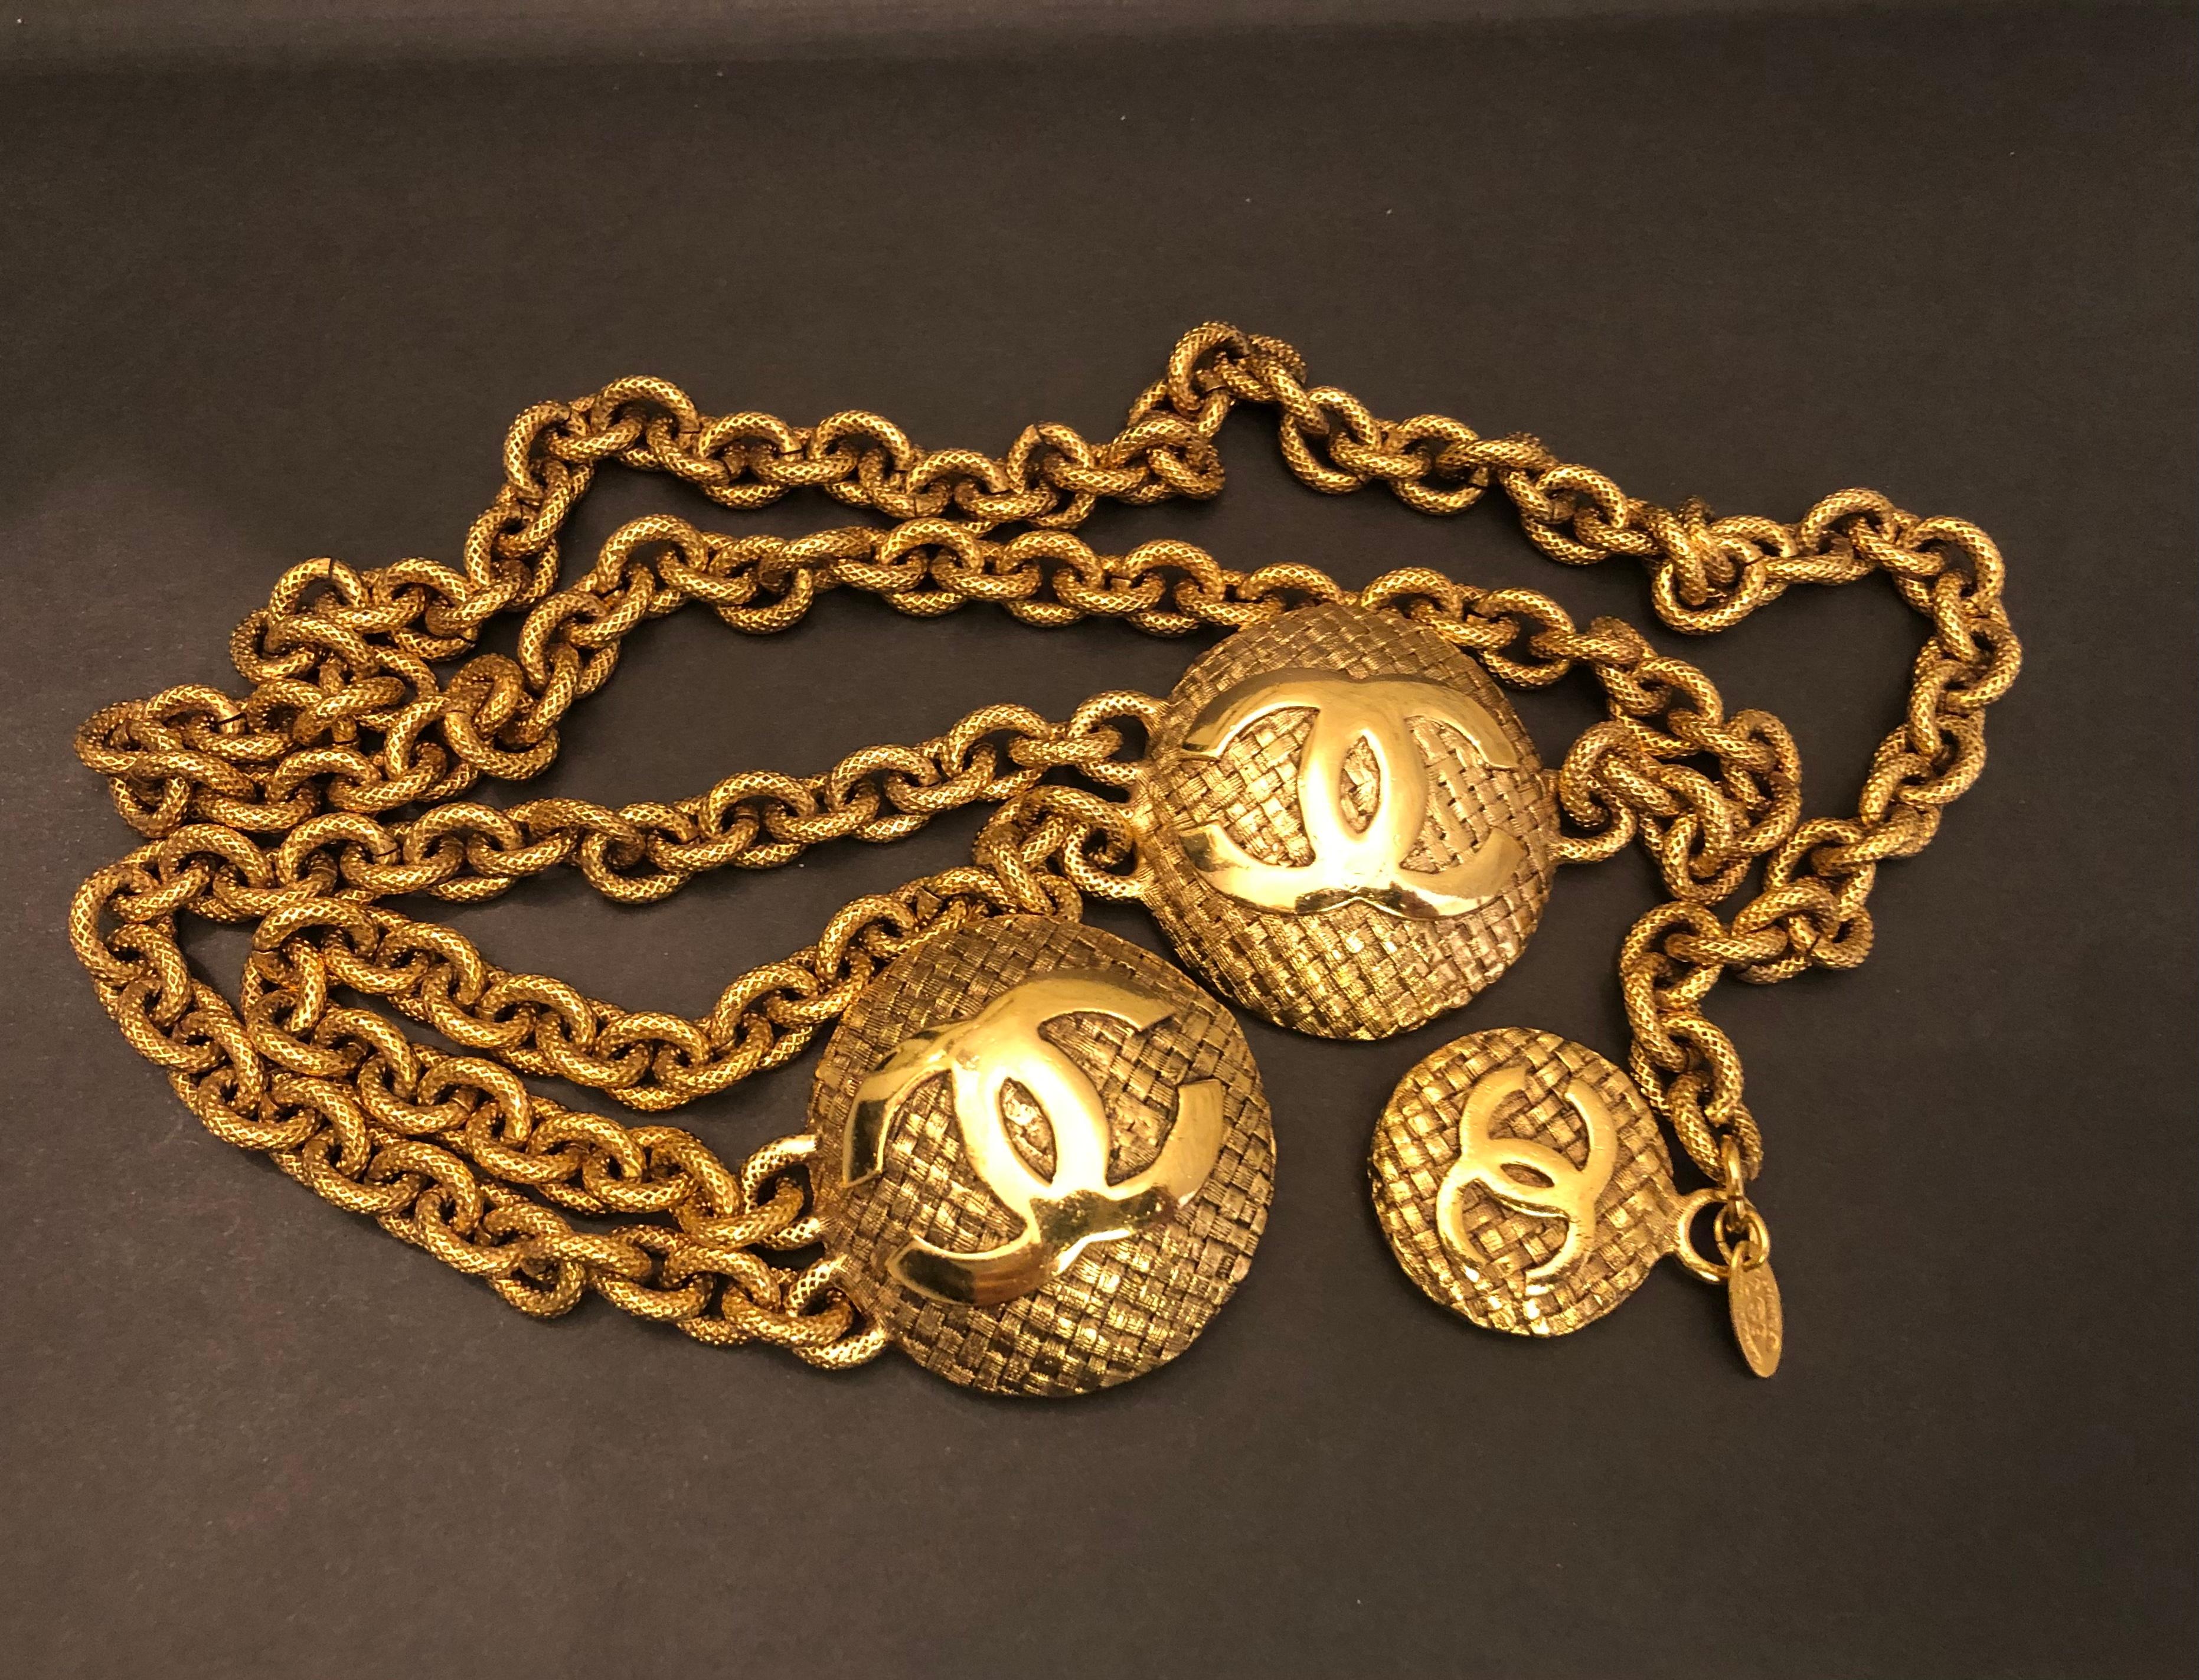 This vintage CHANEL chain belt is crafted of gold toned textured chains featuring two CC medallions in tweed pattern and a CC tweed charm. Adjustable hook fastening. Chain measures approximately 87 cm. Medallions measure 4 cm and 2.6 cm. Stamped